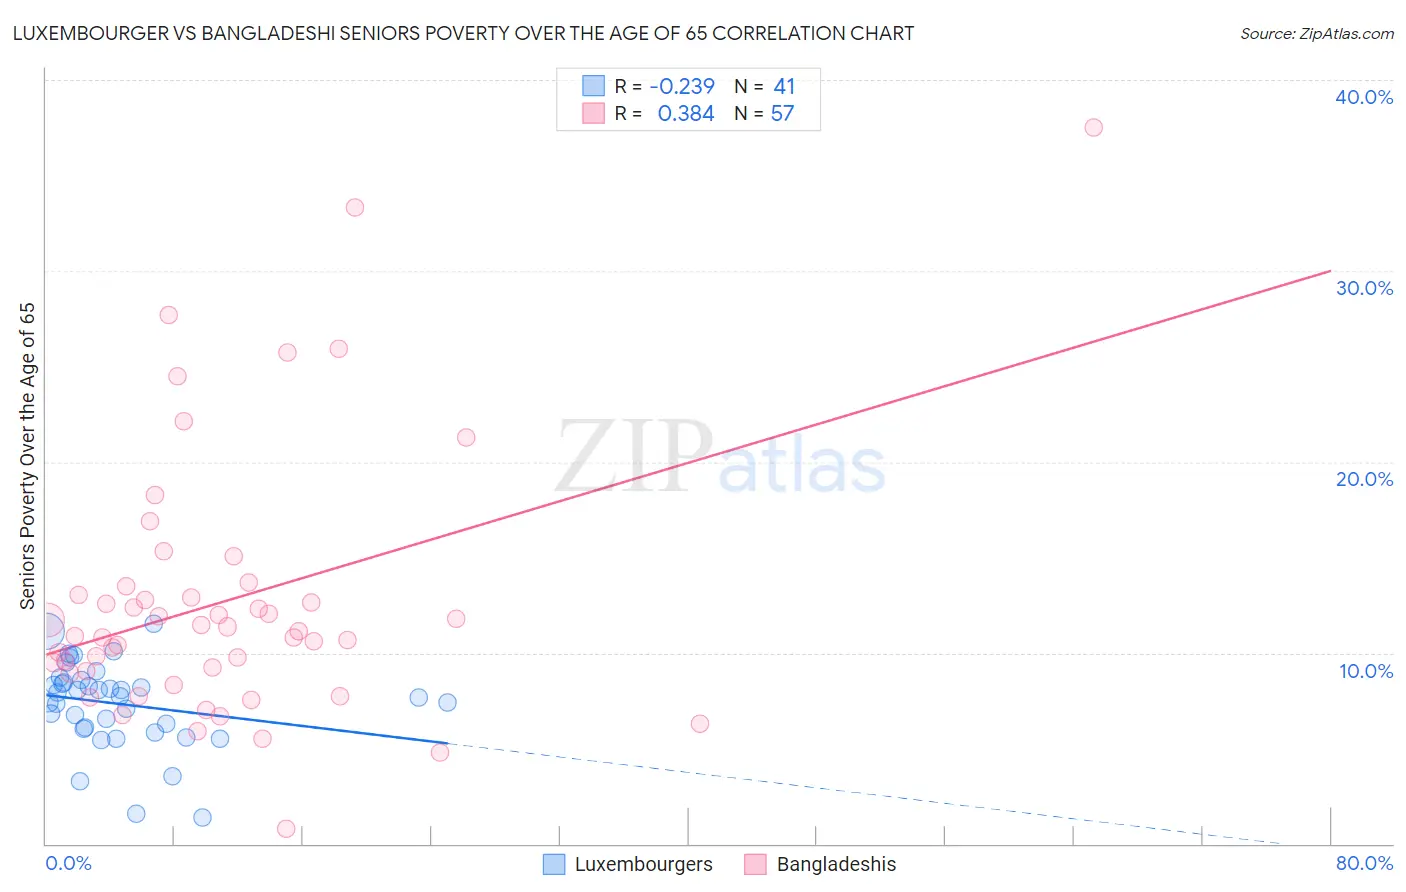 Luxembourger vs Bangladeshi Seniors Poverty Over the Age of 65